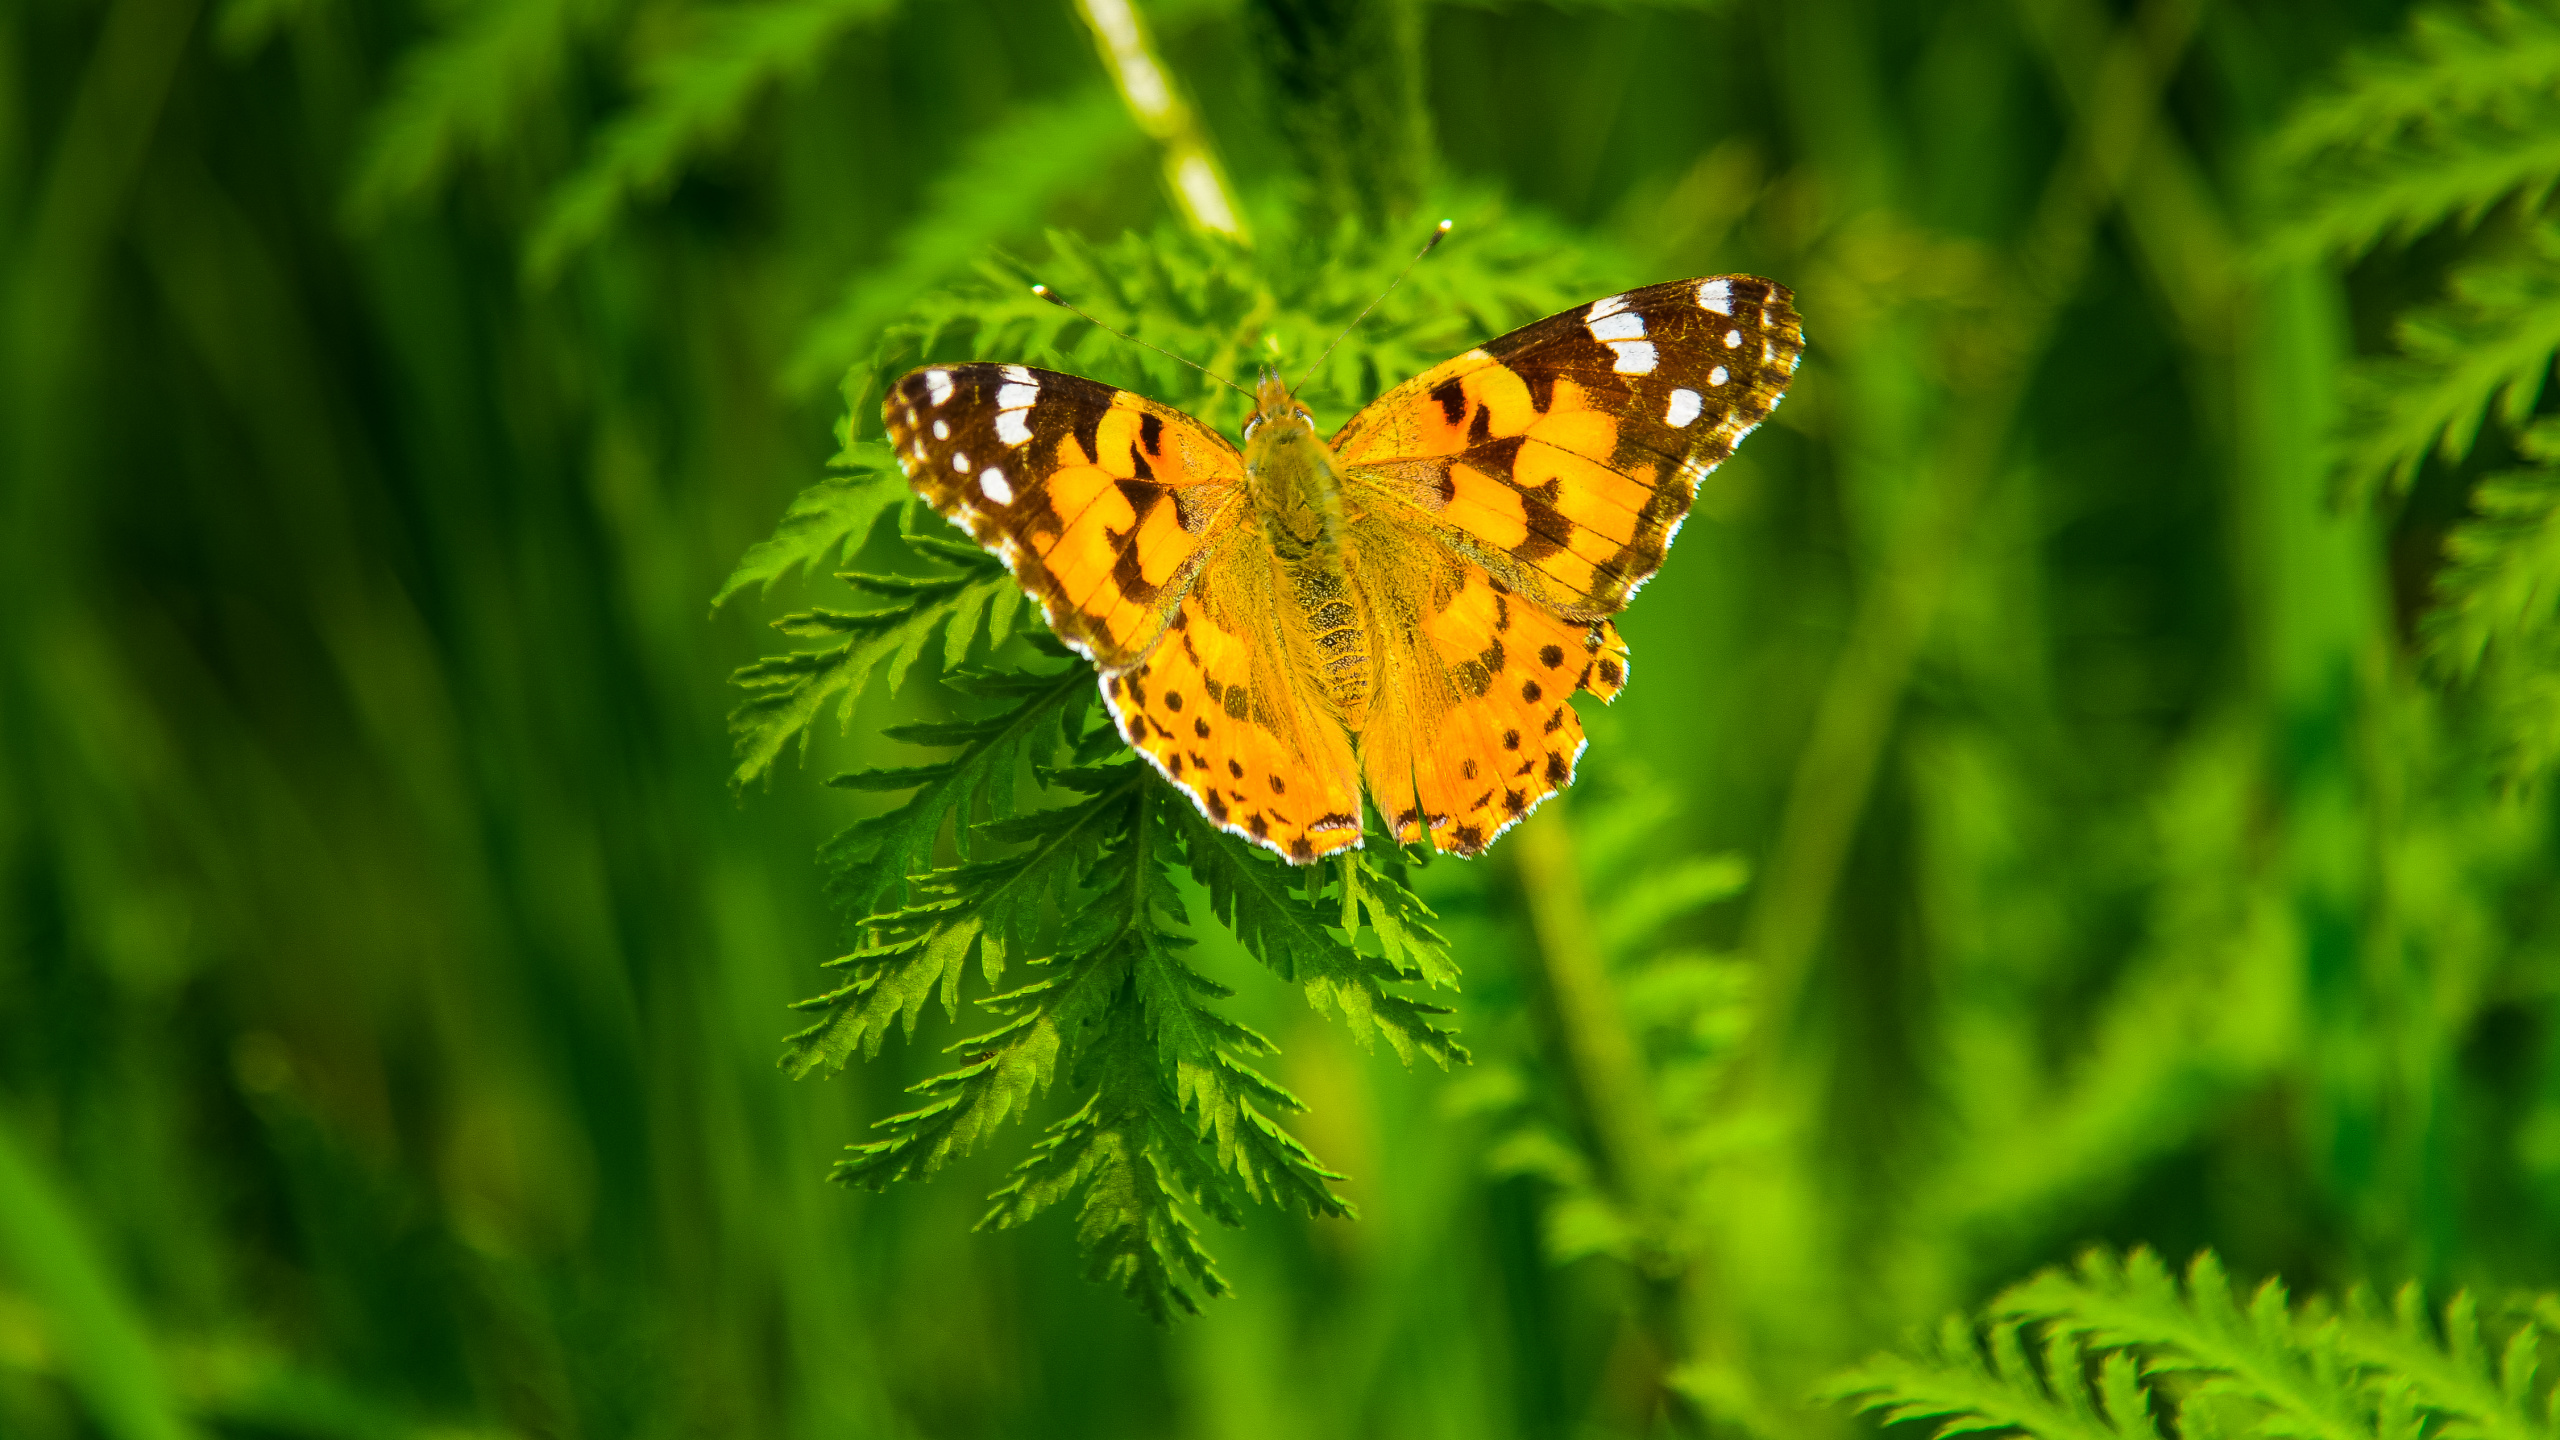 Yellow and Black Butterfly on Green Plant. Wallpaper in 2560x1440 Resolution